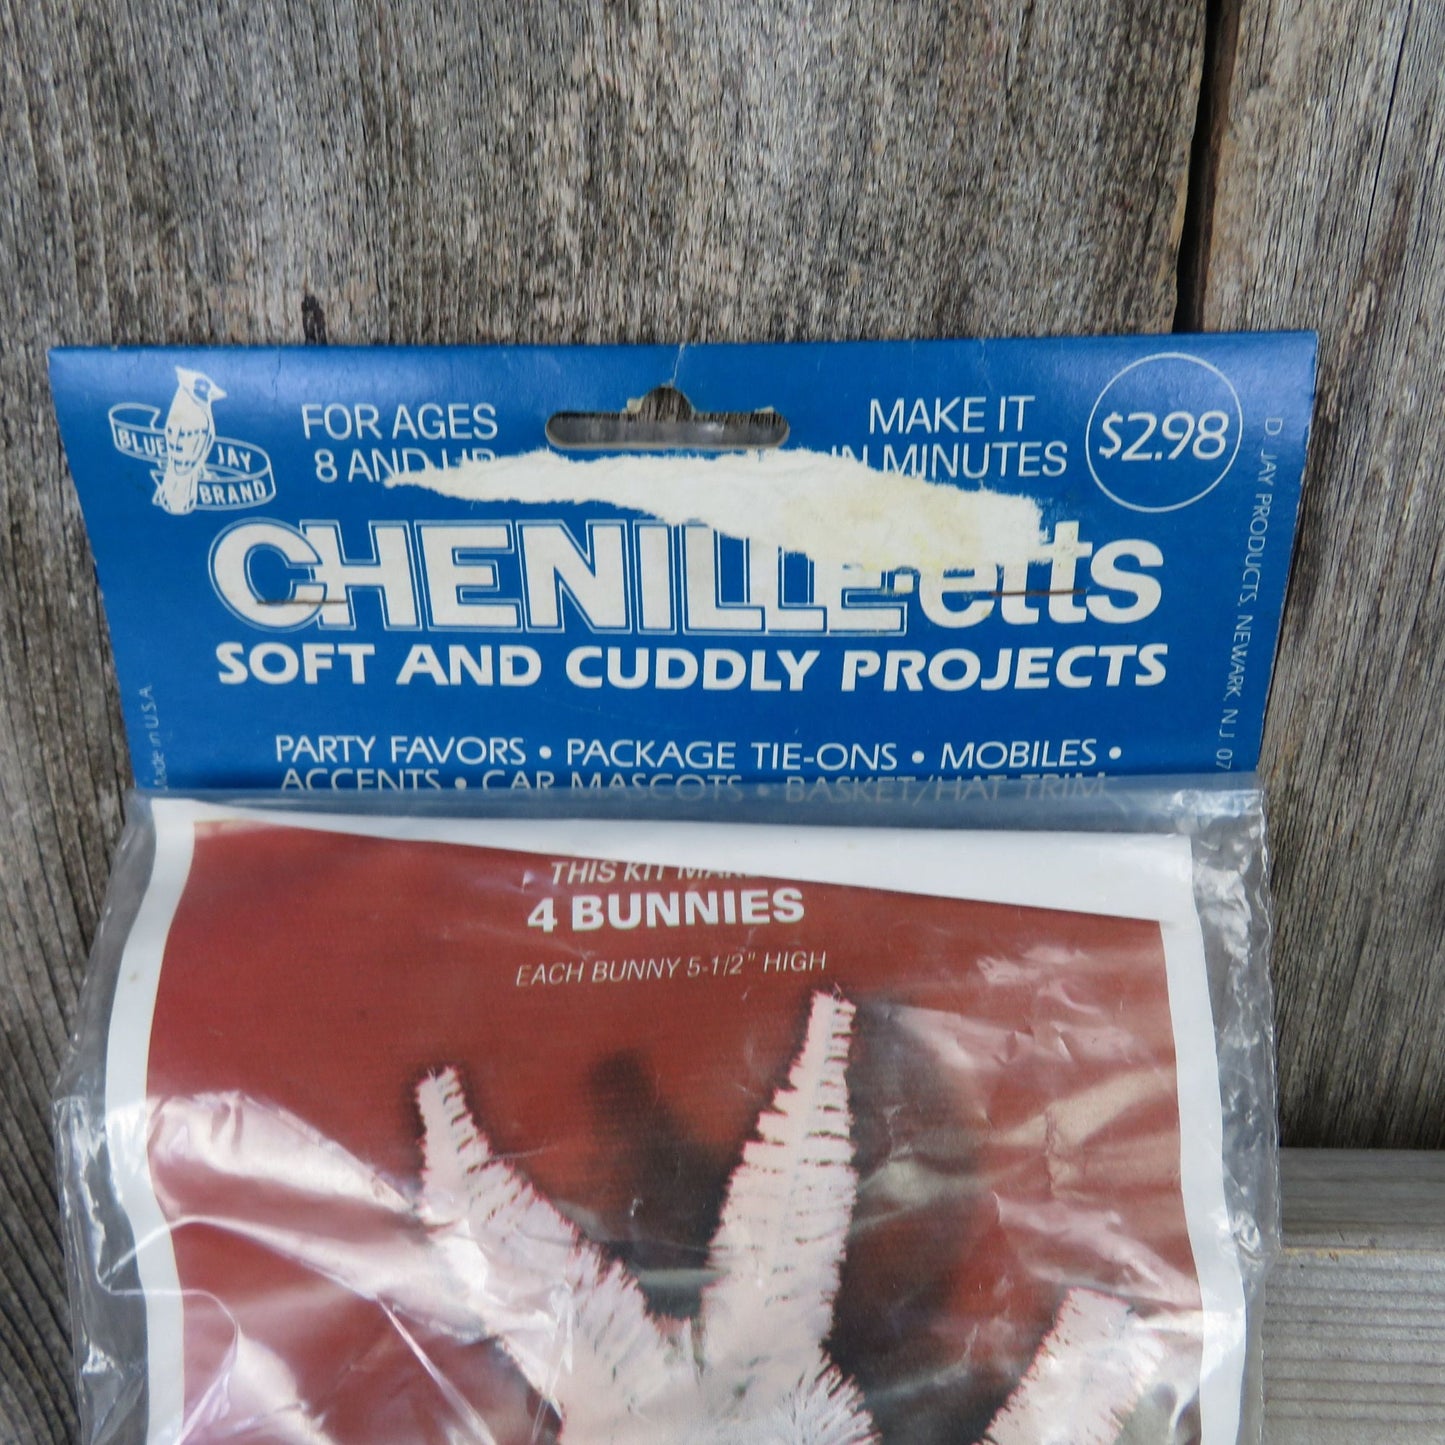 White Bunny Craft Kit Chenille-etts Projects Blue Jay Brand Easter Rabbit Pipe Cleaner Chenille Art Kids Activities Made in USA